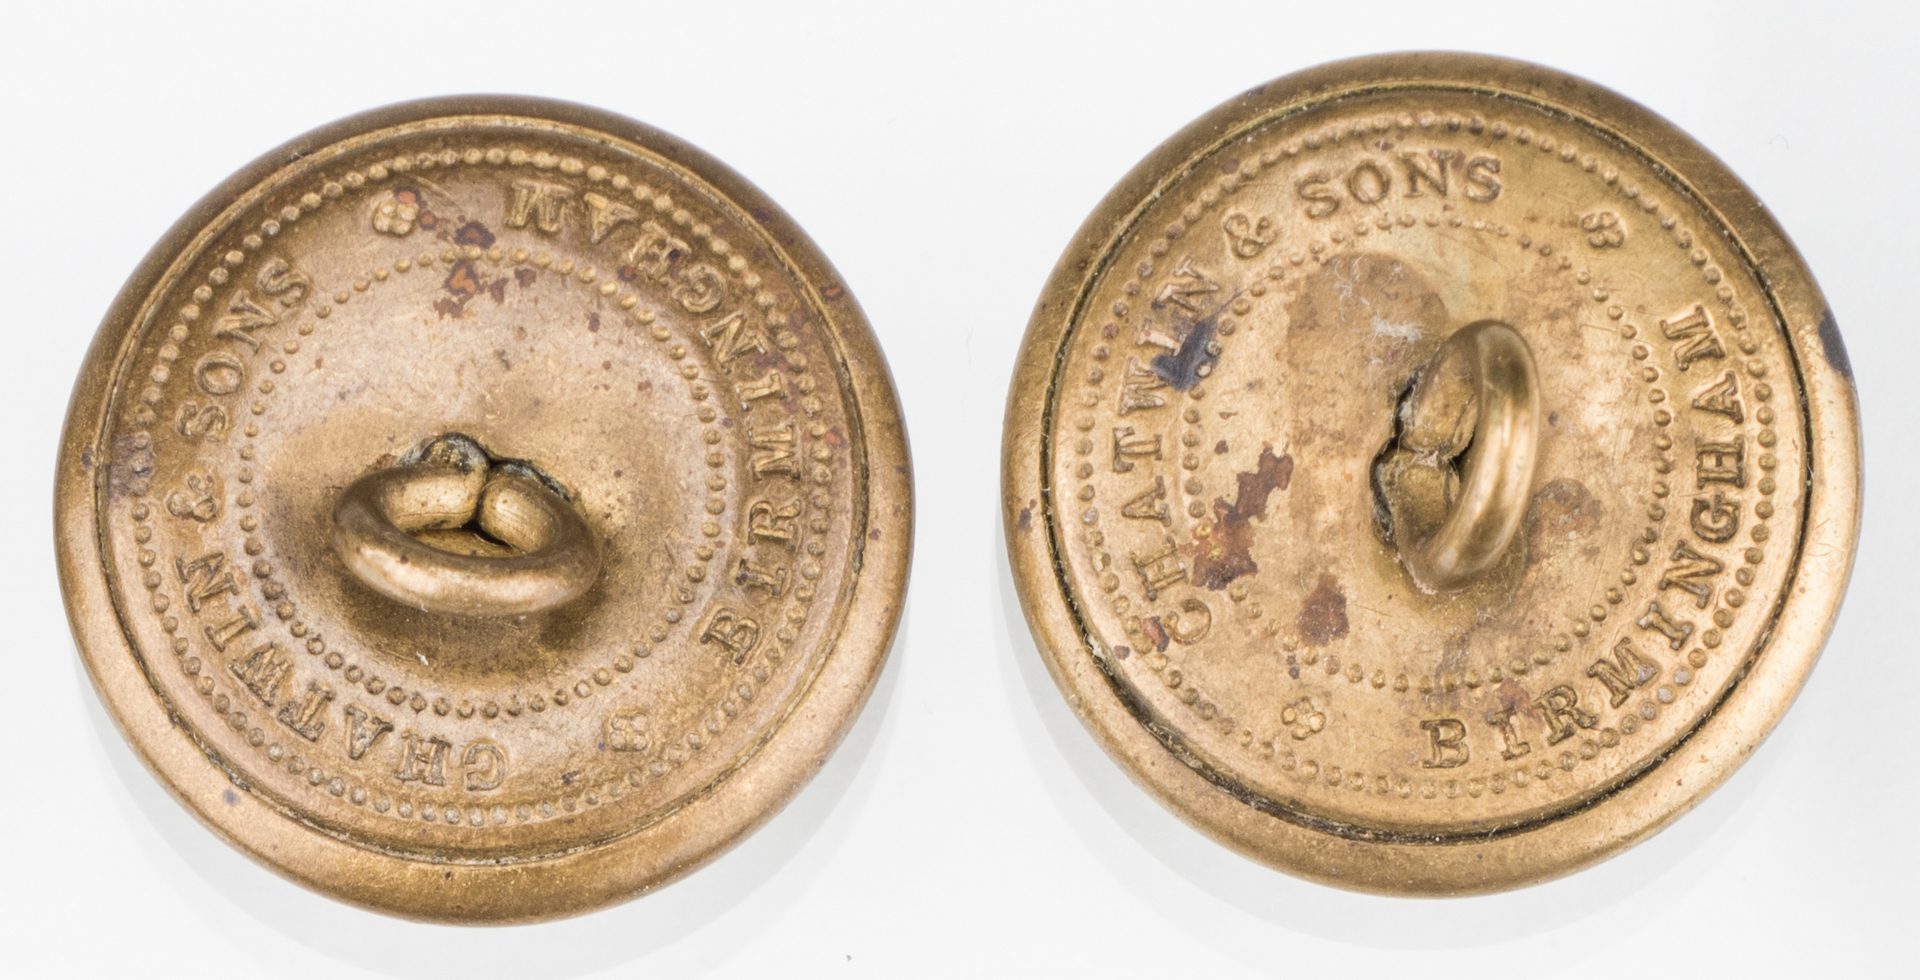 Lot 205: 4 Rare Confederate Uniform Buttons, Chatwin & Sons, Group #2